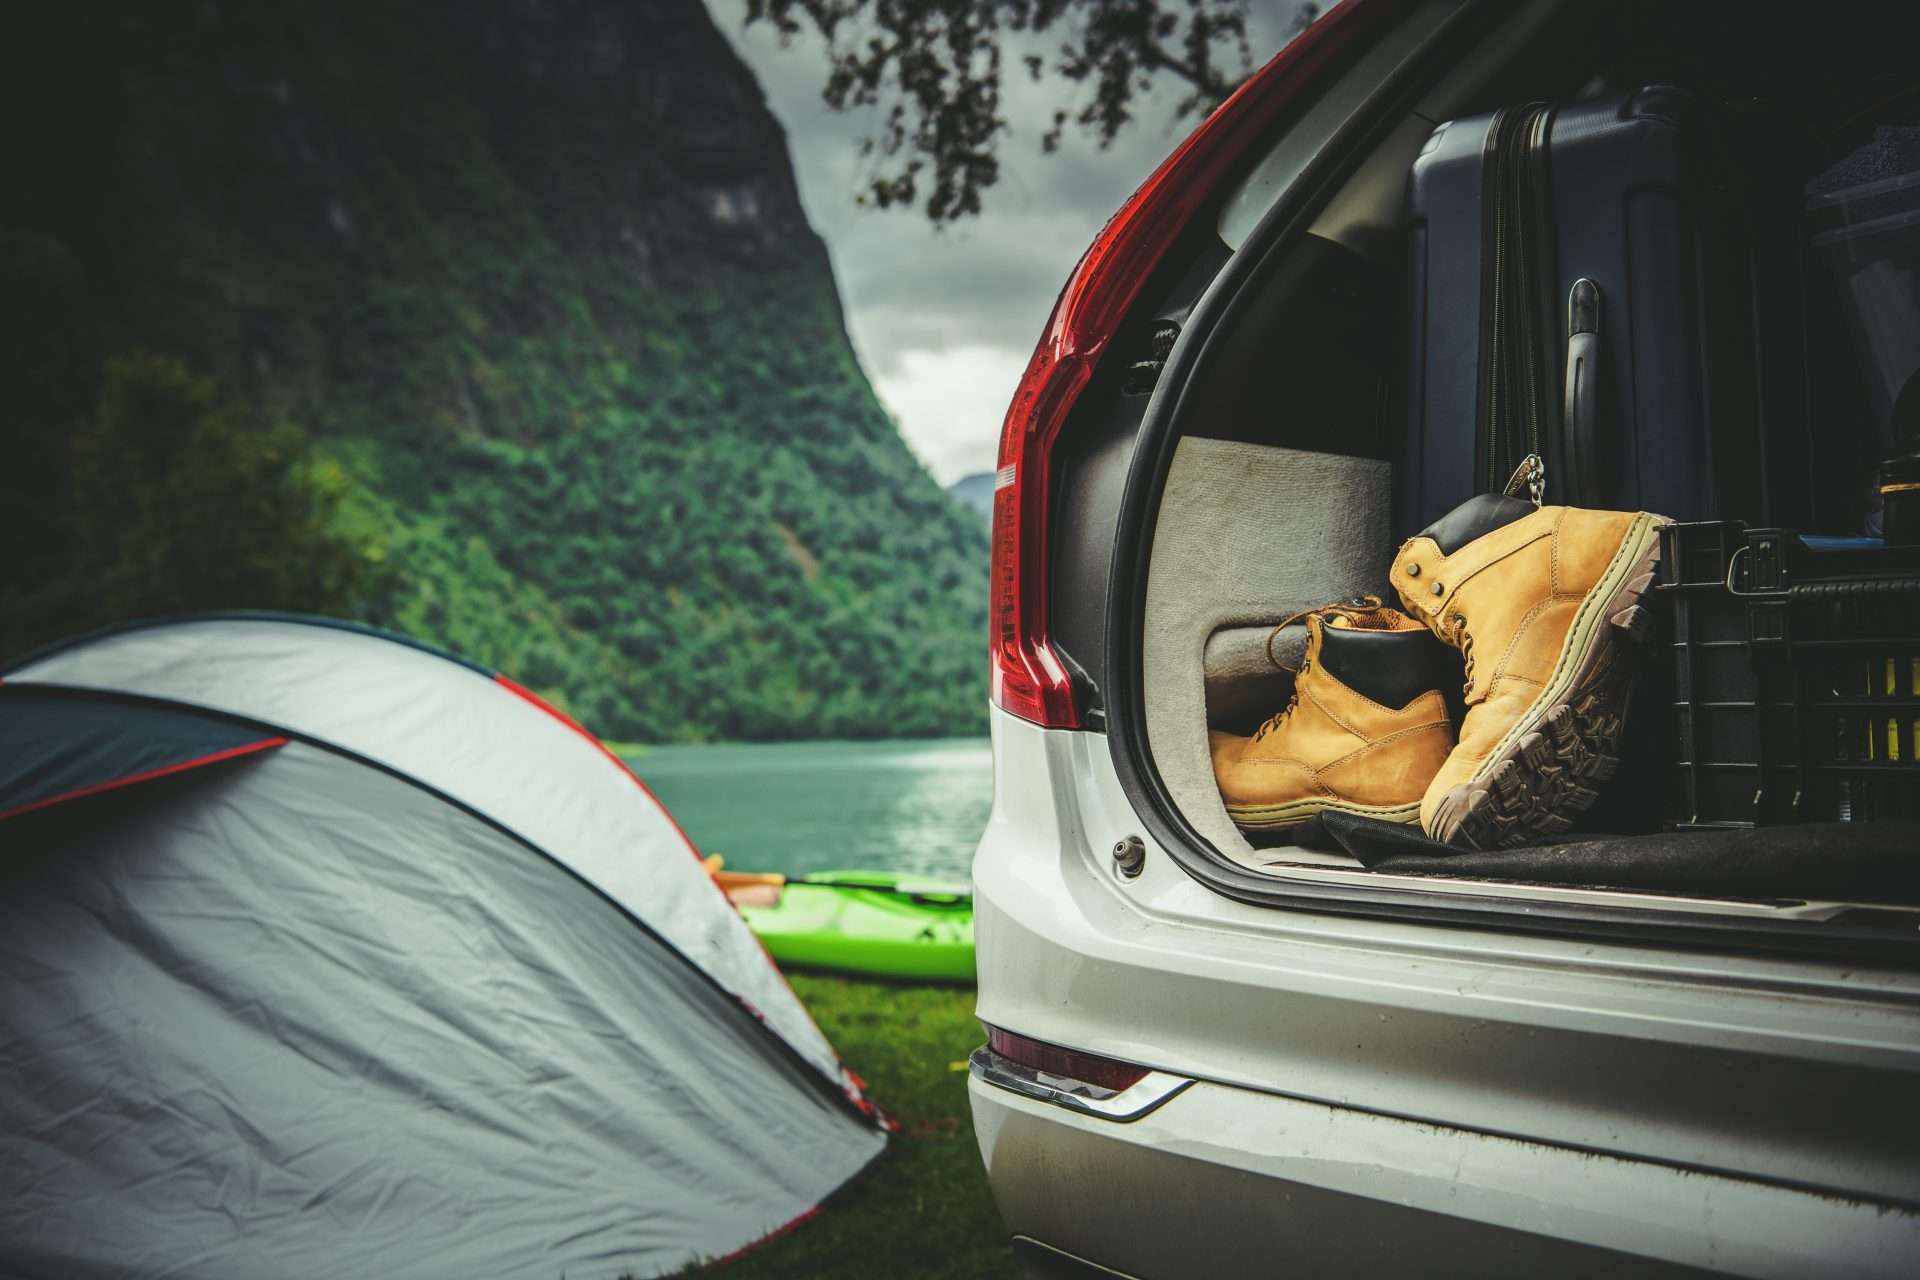 Tent set up by lake with camping gear in the back of a car